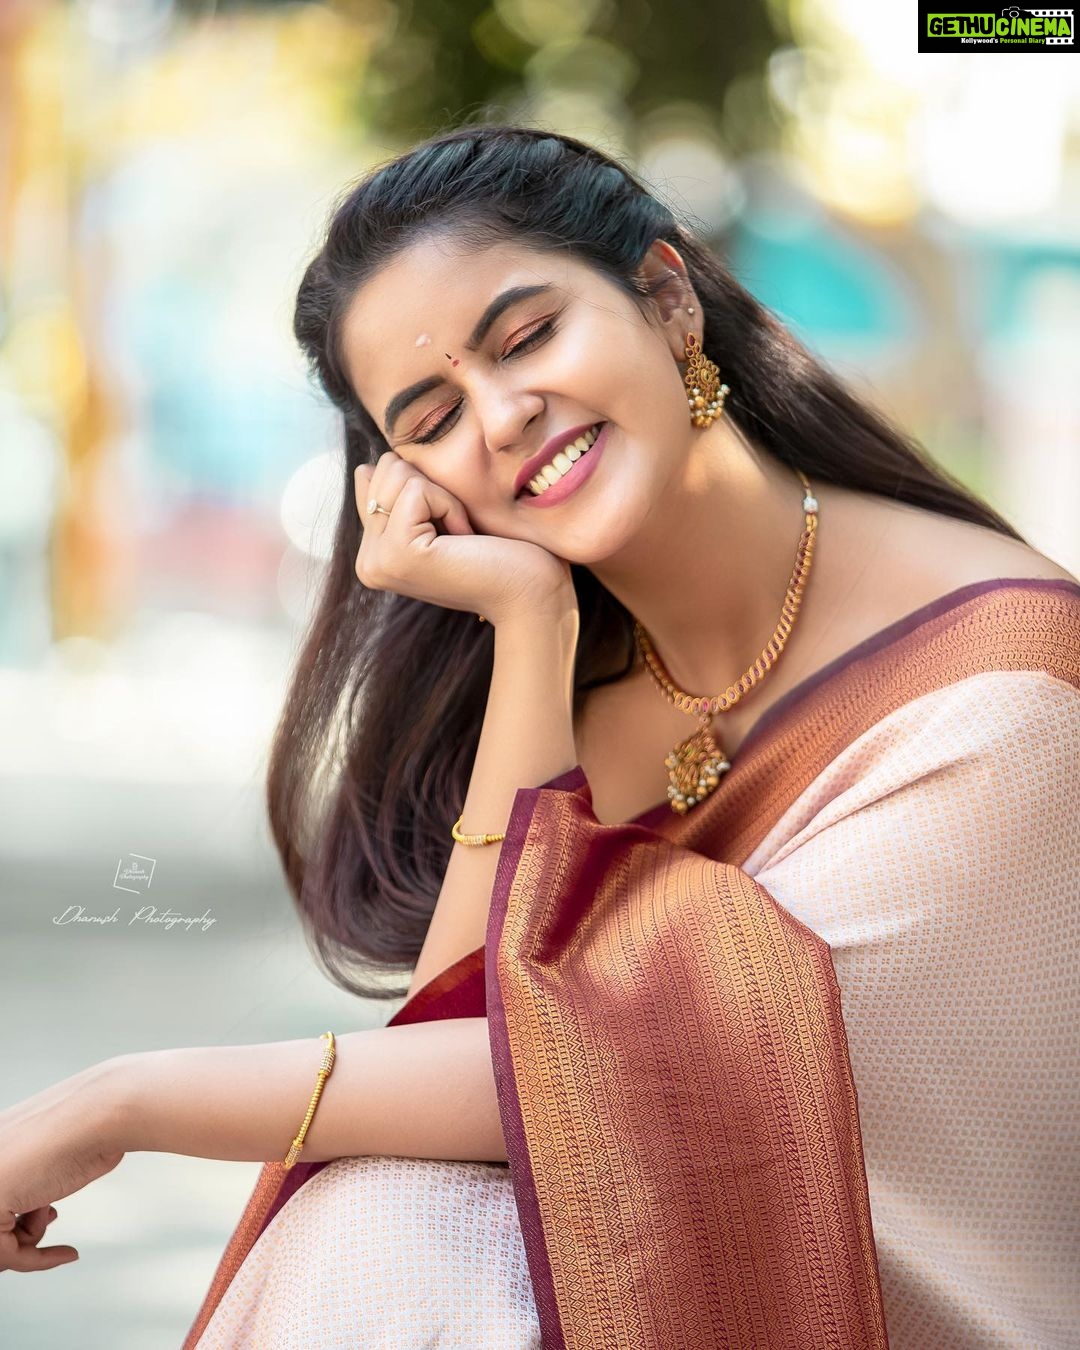 Chaitra Reddy - 157.4K Likes - Most Liked Instagram Photos